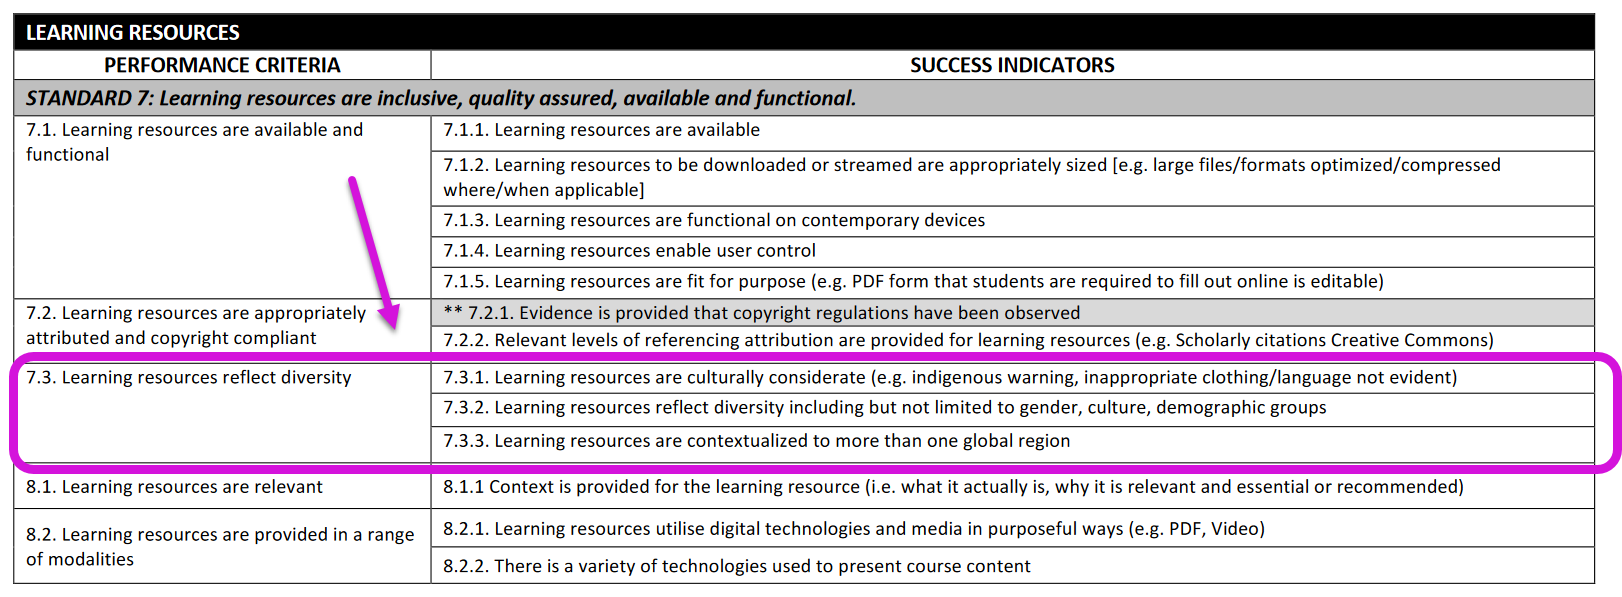 The pictures is an excerpt from the ASCILITE technology-enhanced learning accreditation scheme (standard 7.3) that list 7.3.1 Learning resources are culturally considerate; 7.3.2 Learning resources reflect diversity including but not limited to gender, culture, demographic groups, and 7.3.3 Learning Resources are contextualized to more than one global region.